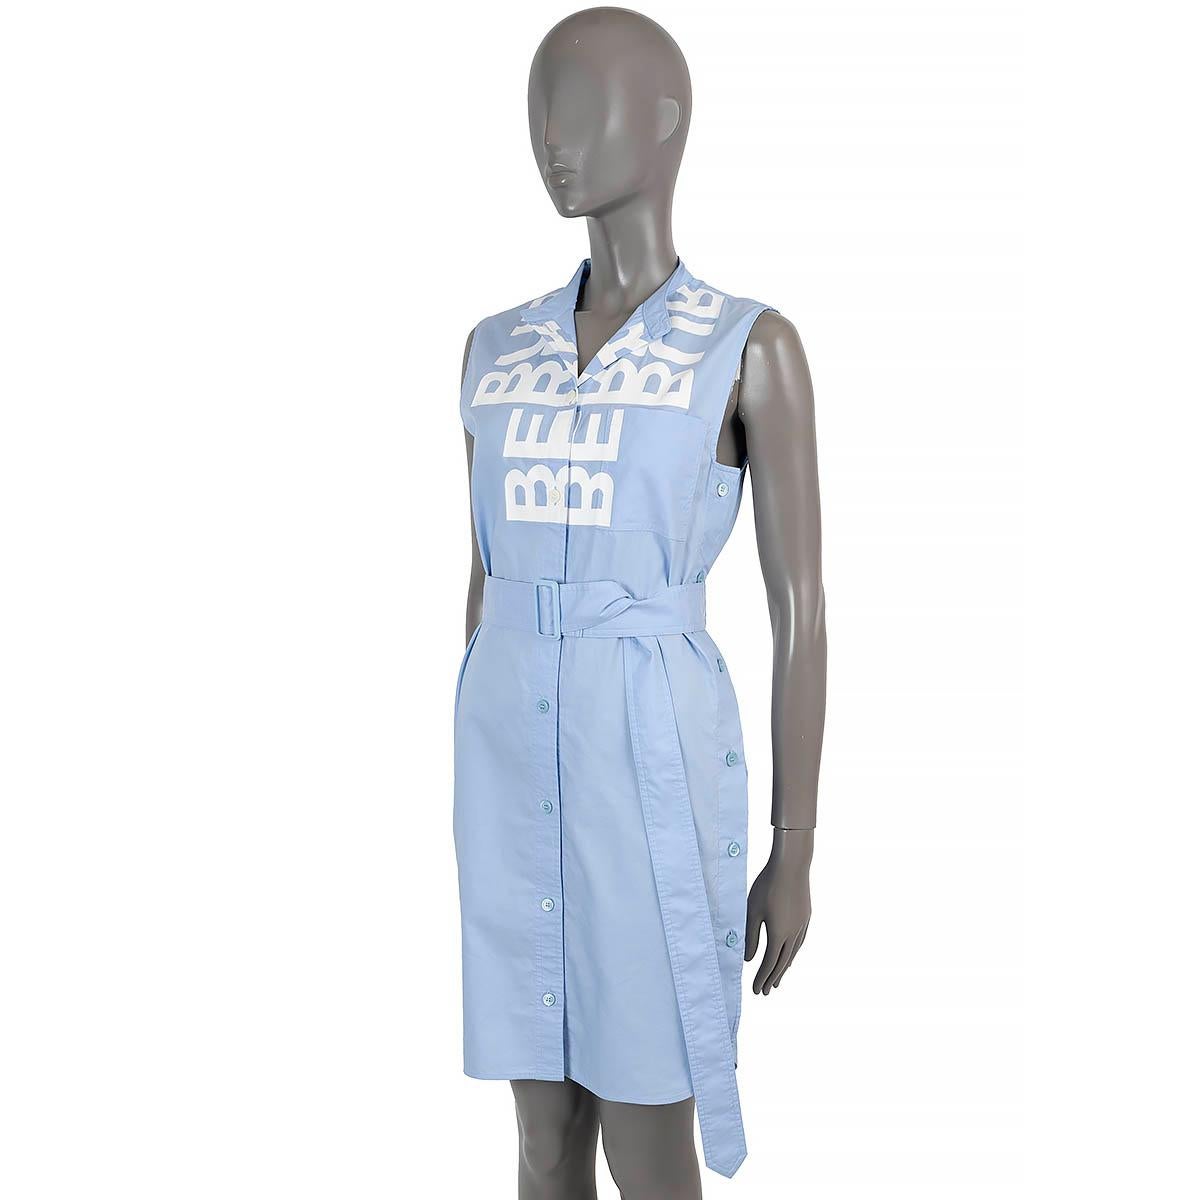 100% authentic Burberry Maisy shirt dress in light blue poplin cotton (100% - please not the content tag is missing) with logo-print in white. Features a round neck with band collar, a sleeveless relaxed silhouette with fishtail hem, a chest patch